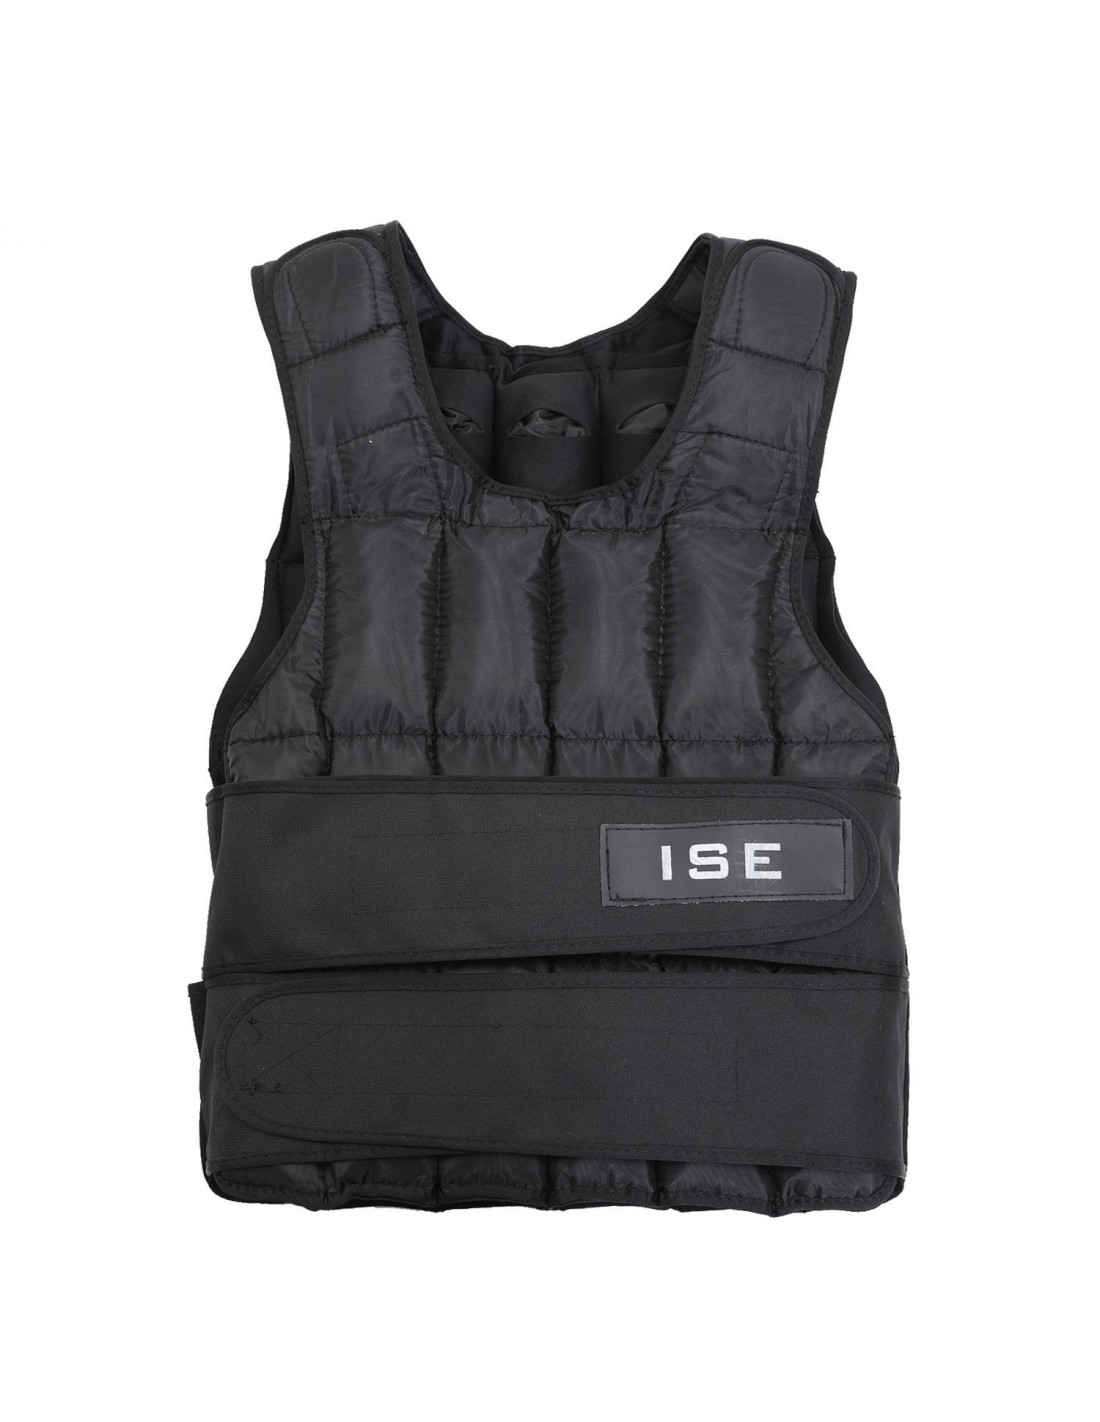 gilet poids musculation